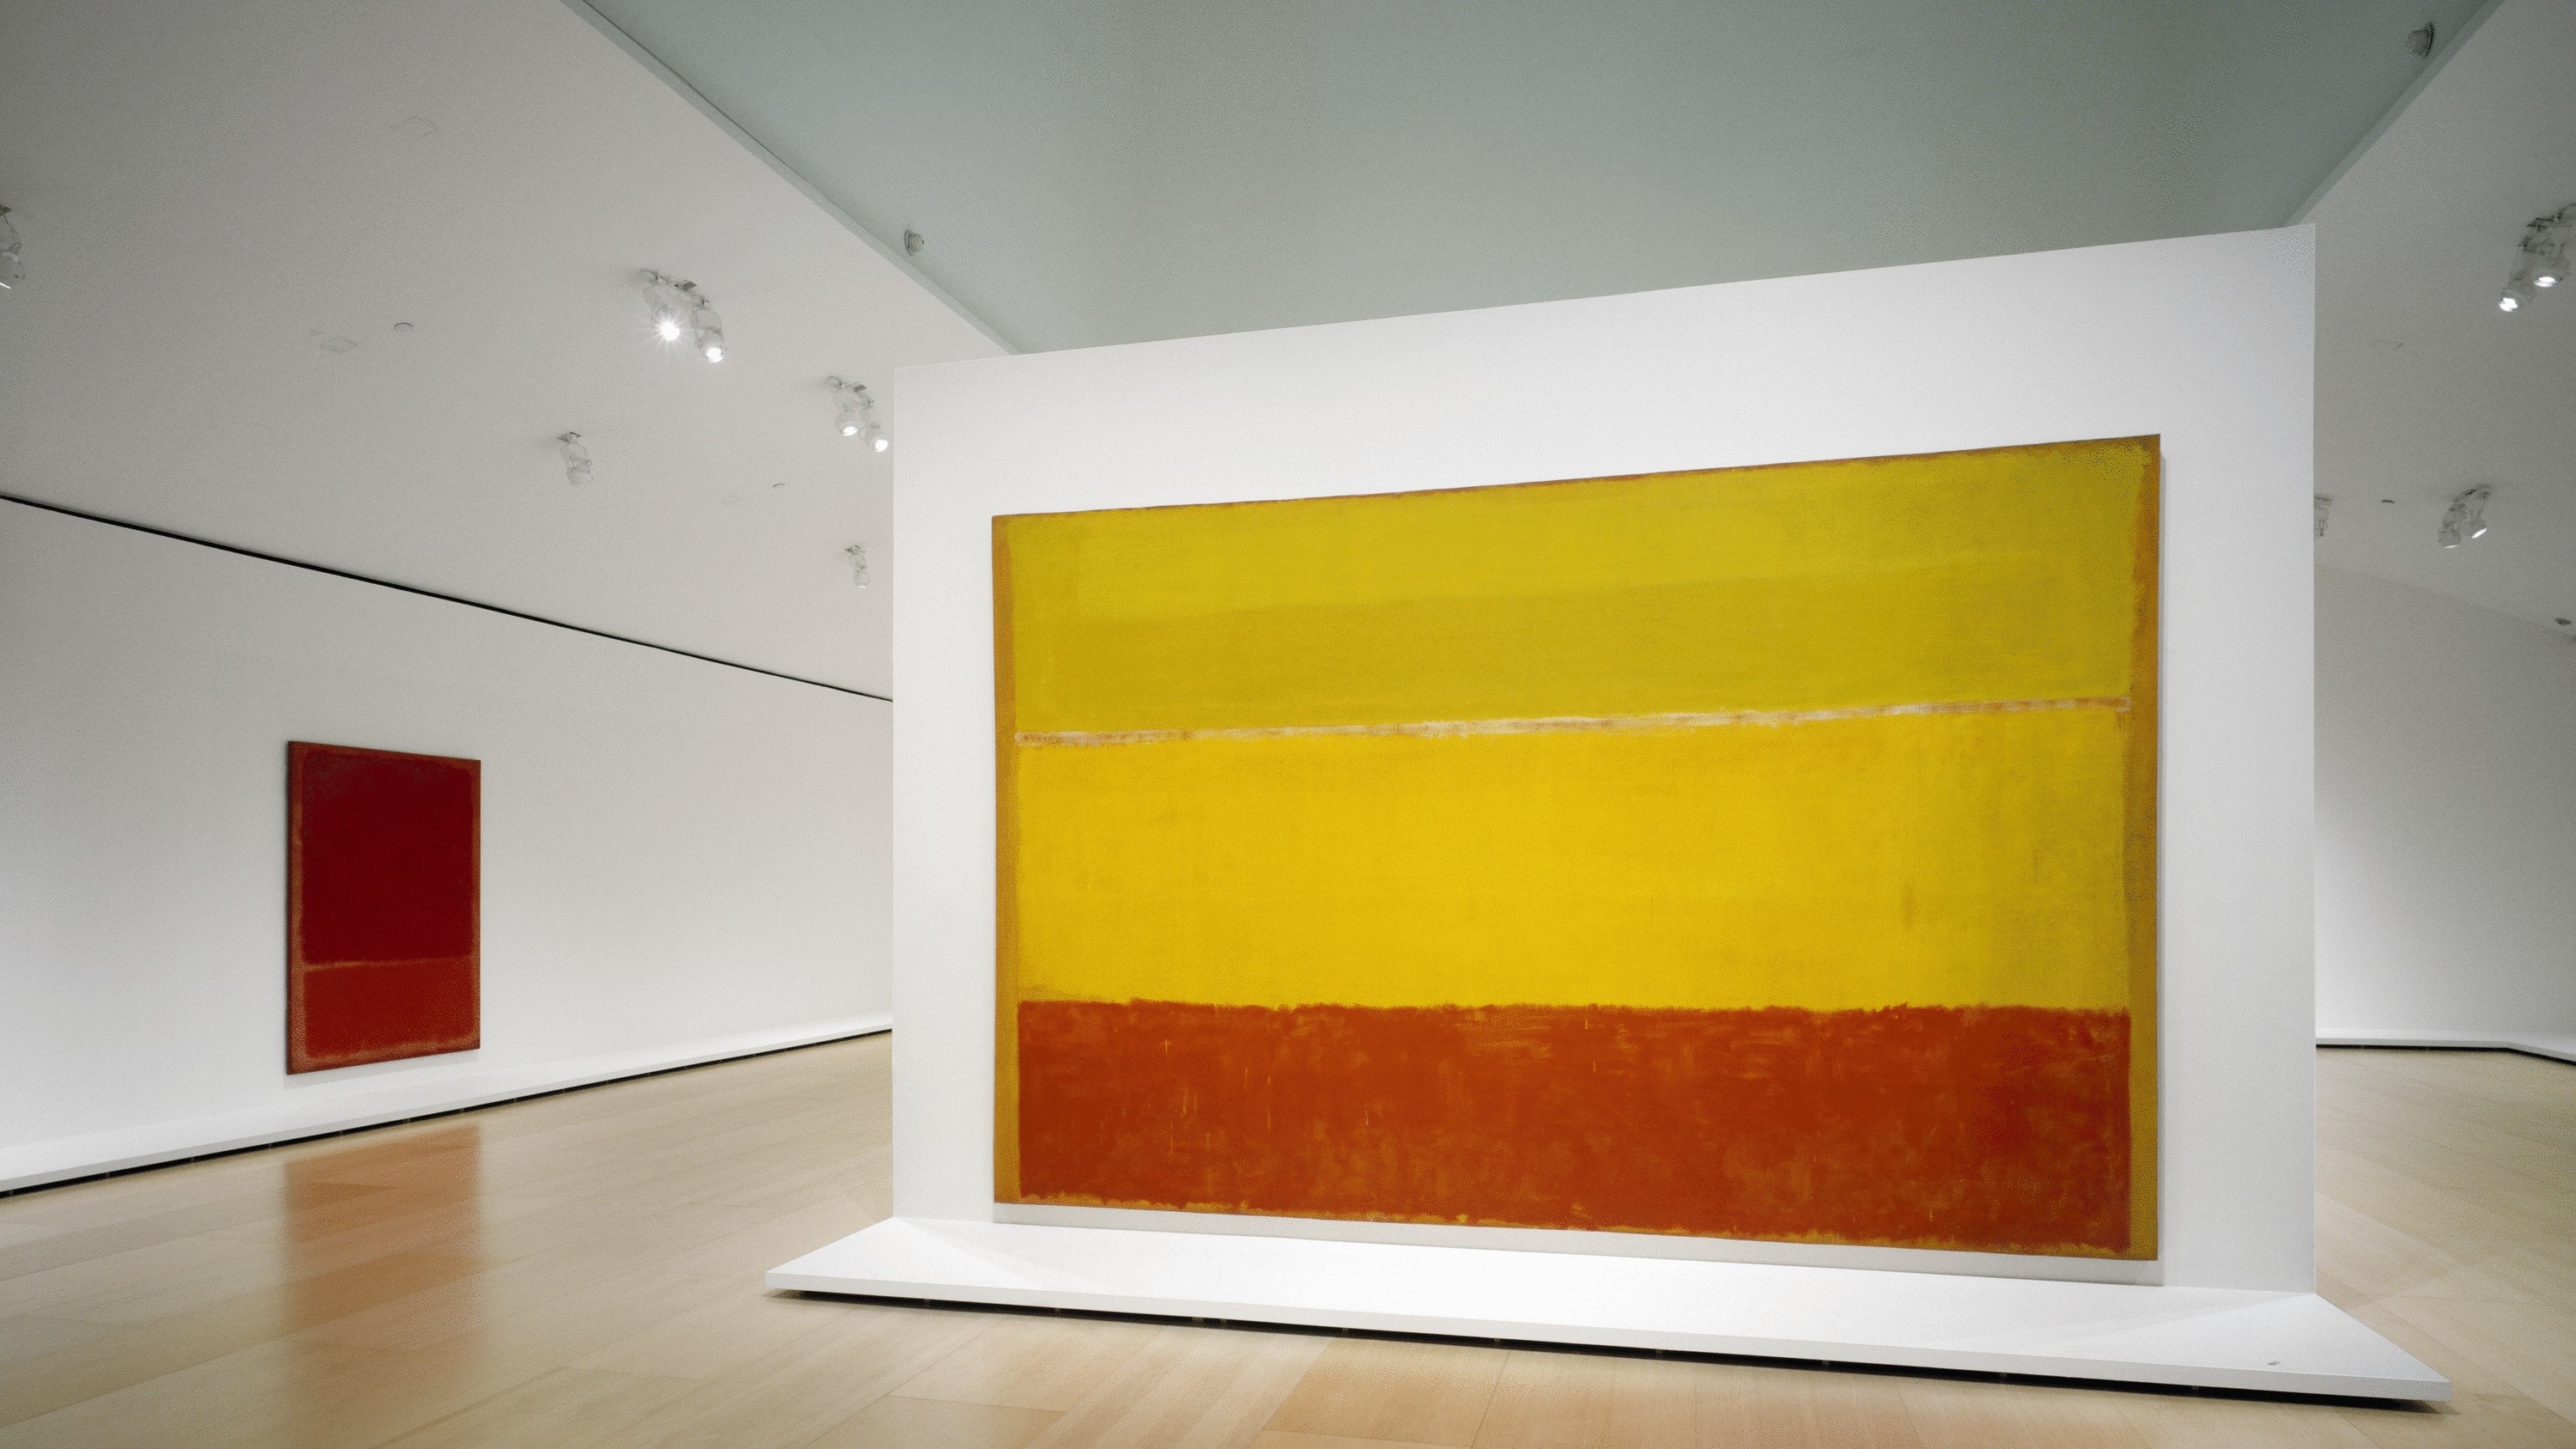 MARK ROTHKO: WHEN COLOUR BECOMES THE EMANATION OF LIGHT - Galerie